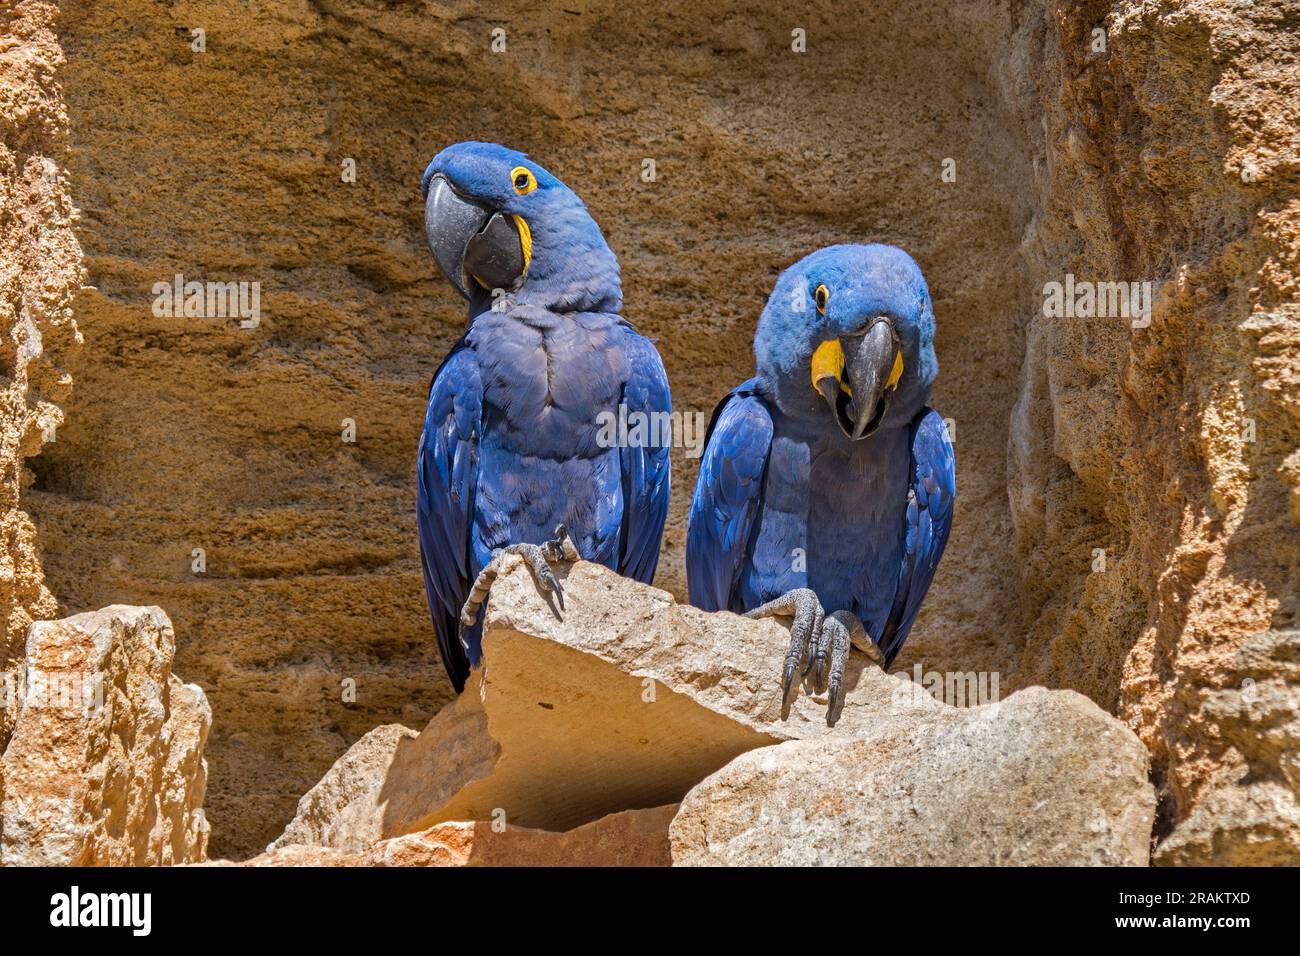 Hyacinth macaw / hyacinthine macaws (Anodorhynchus hyacinthinus) pair on rock ledge in cliff face, parrots native to central and eastern South America Stock Photo